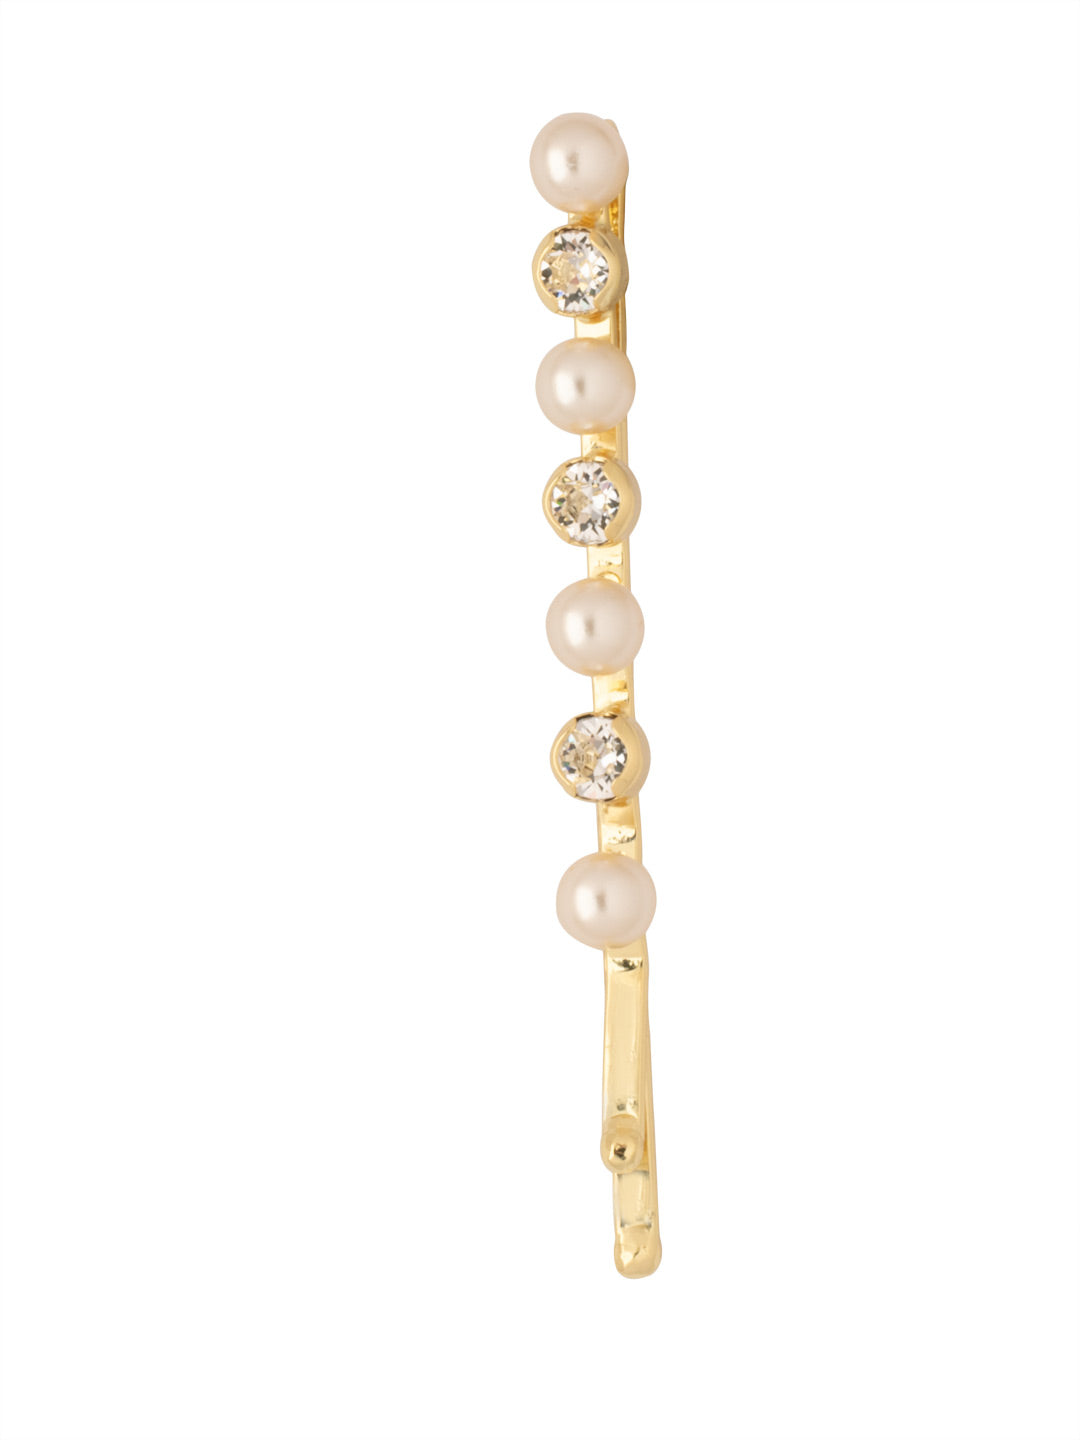 Pearl and Crystal Barrette - HFL7BGMDP - <p>The Pearl and Crystal Barrette features a row of alternating round cutb crystals and freshwater pearls on a sturdy metal bobby pin. From Sorrelli's Modern Pearl collection in our Bright Gold-tone finish.</p>